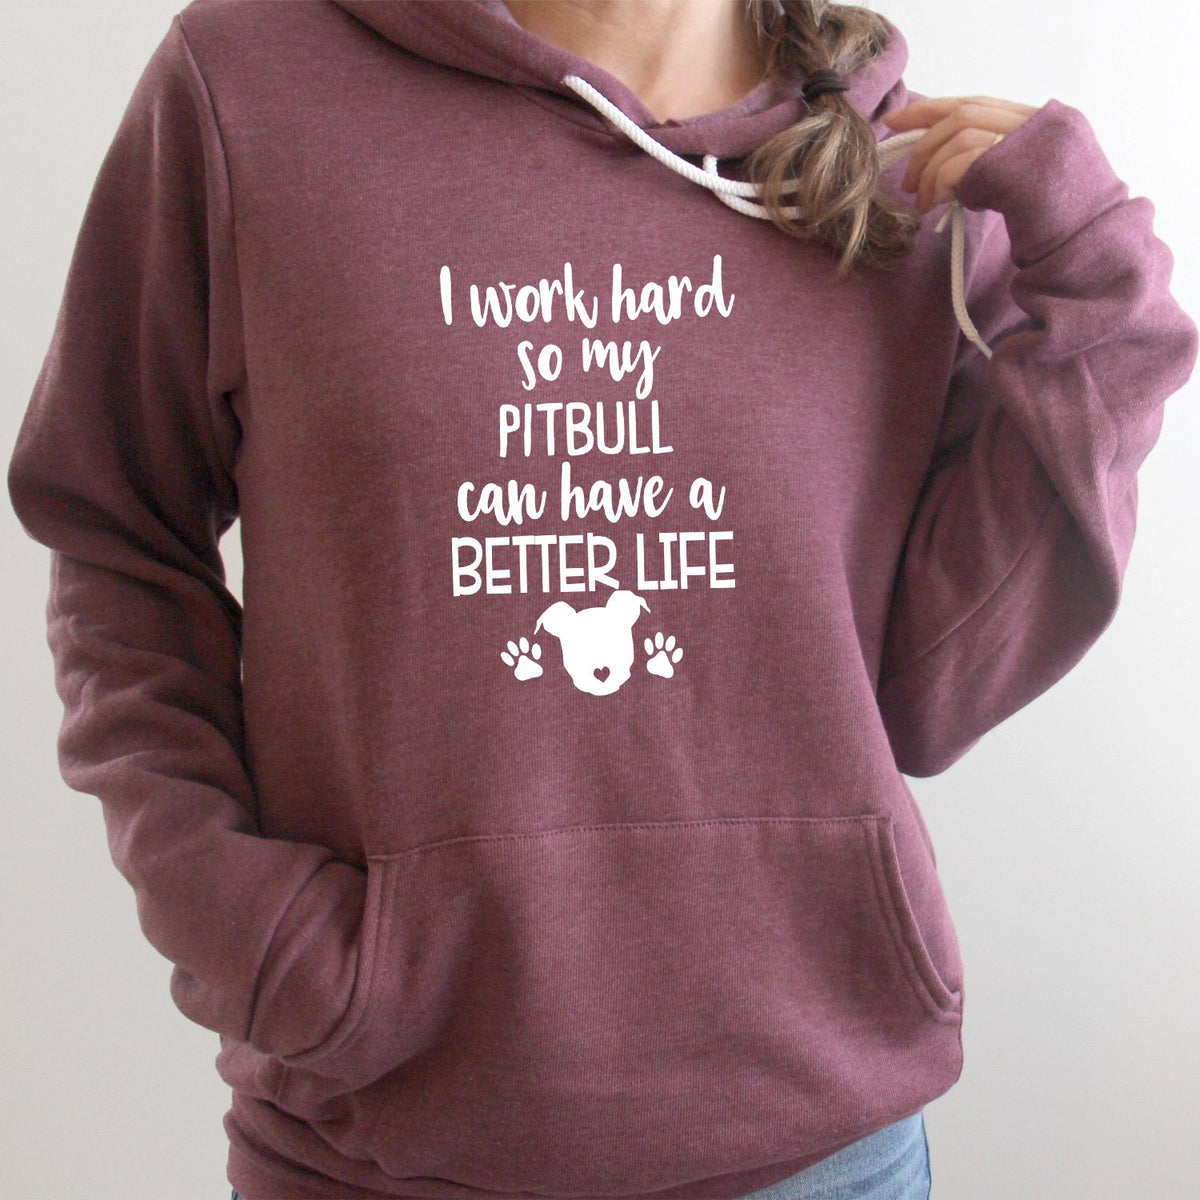 I Work Hard So My Pitbull Can Have A Better Life - Hoodie Sweatshirt